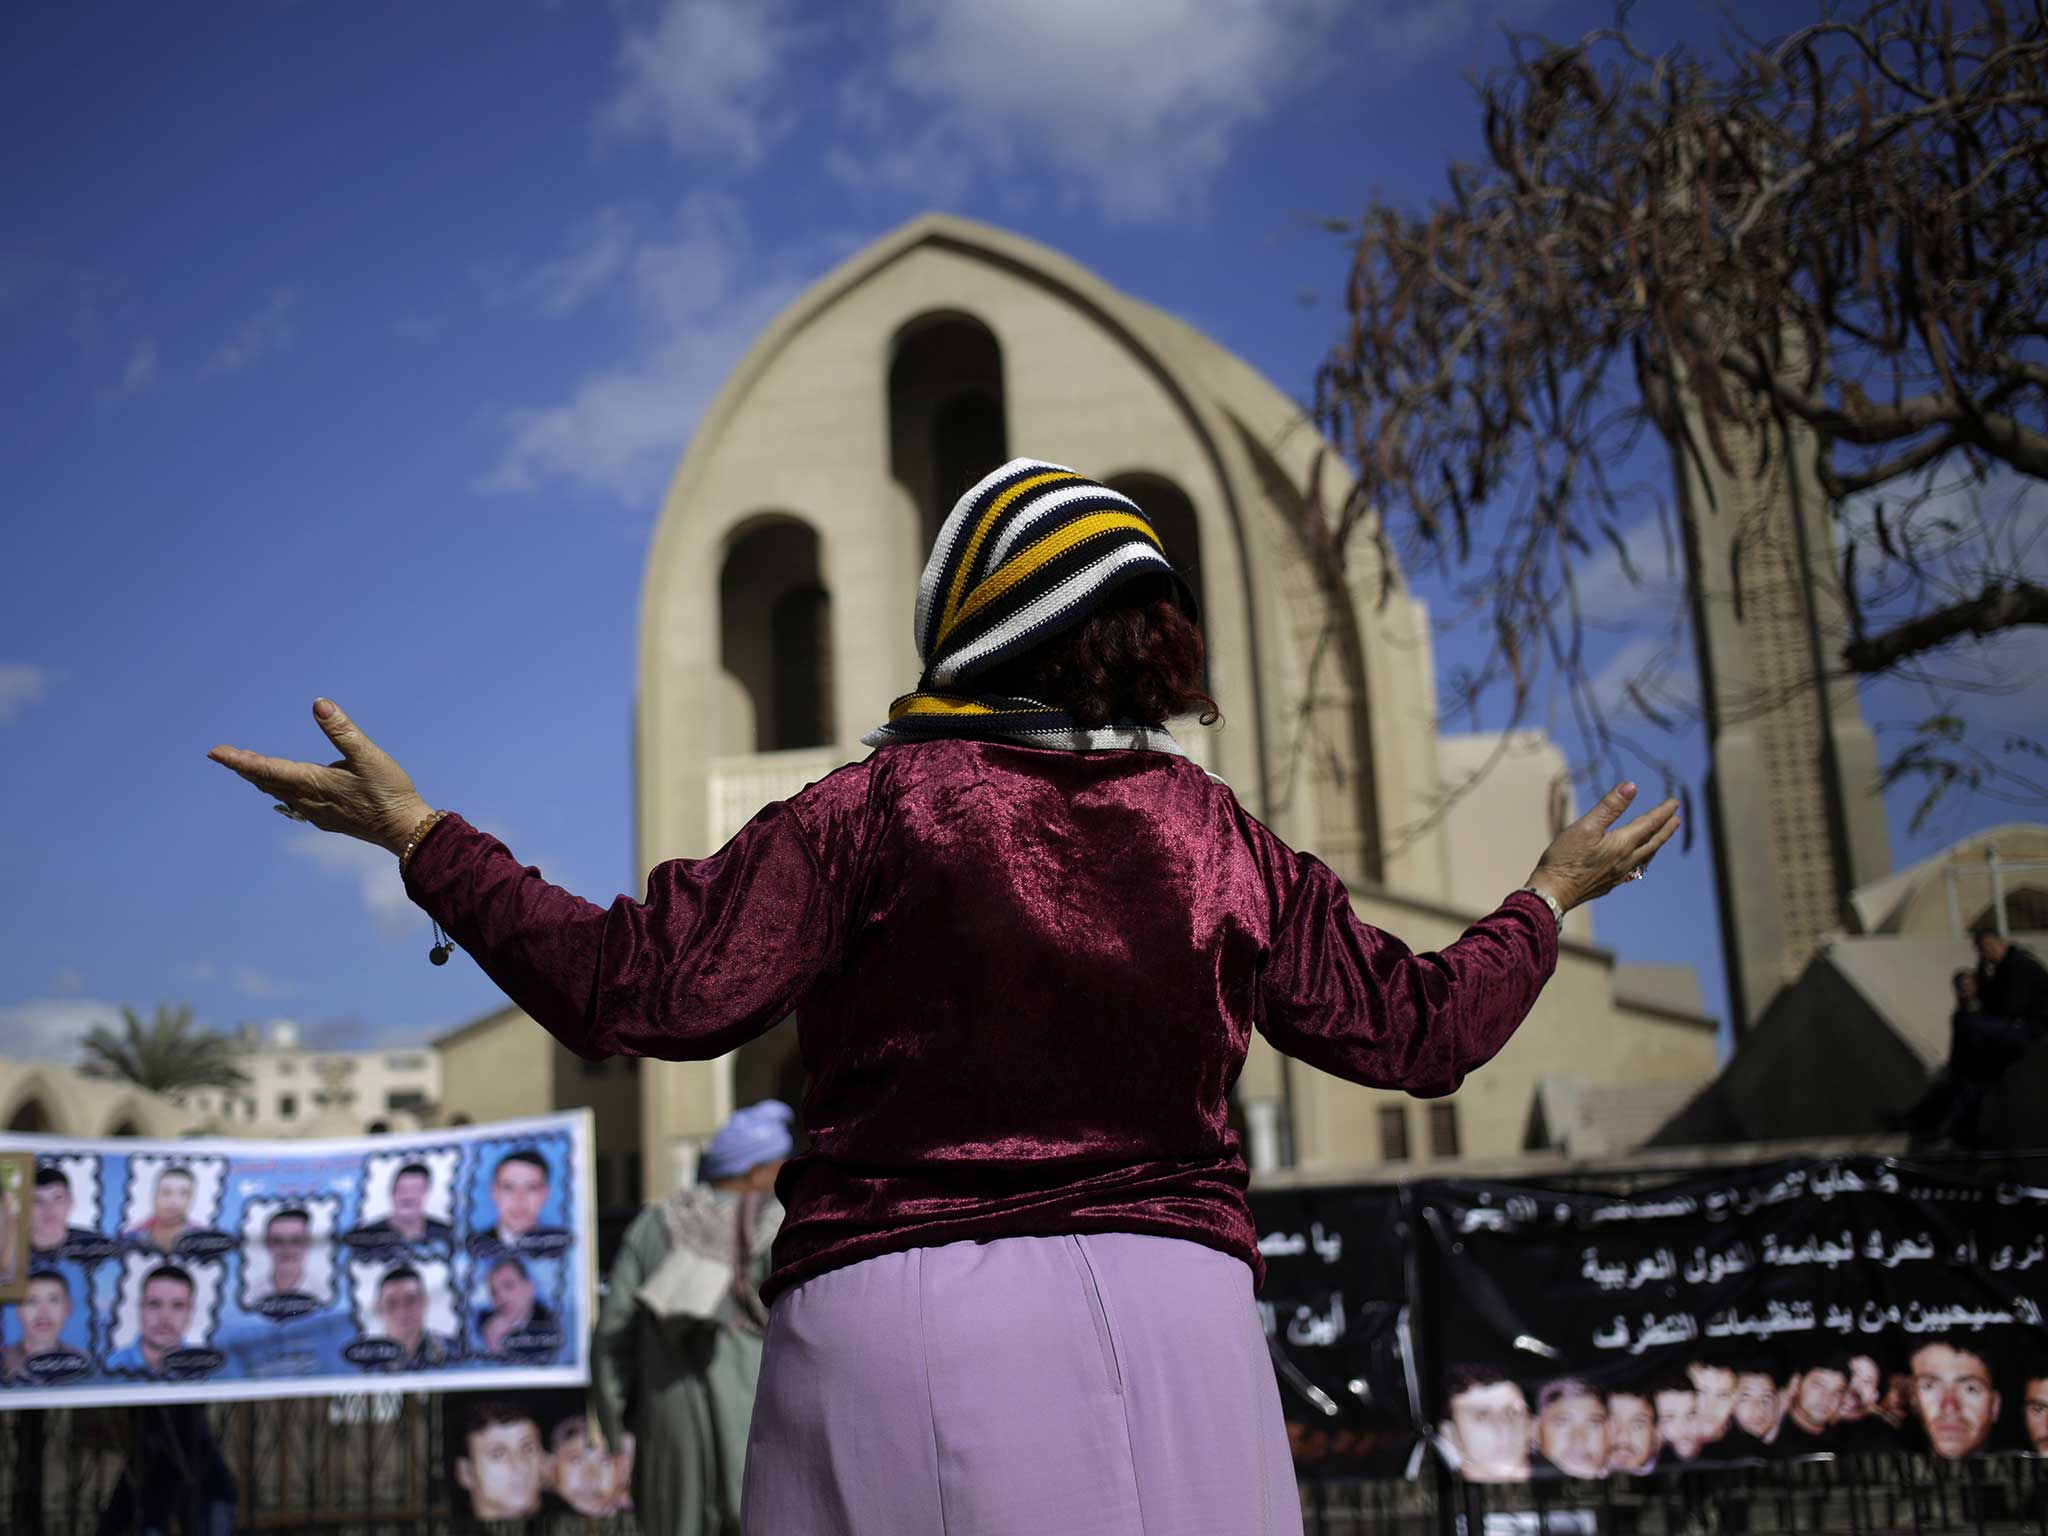 A Coptic Christian woman prays for the release of 21 Coptic Egyptian men